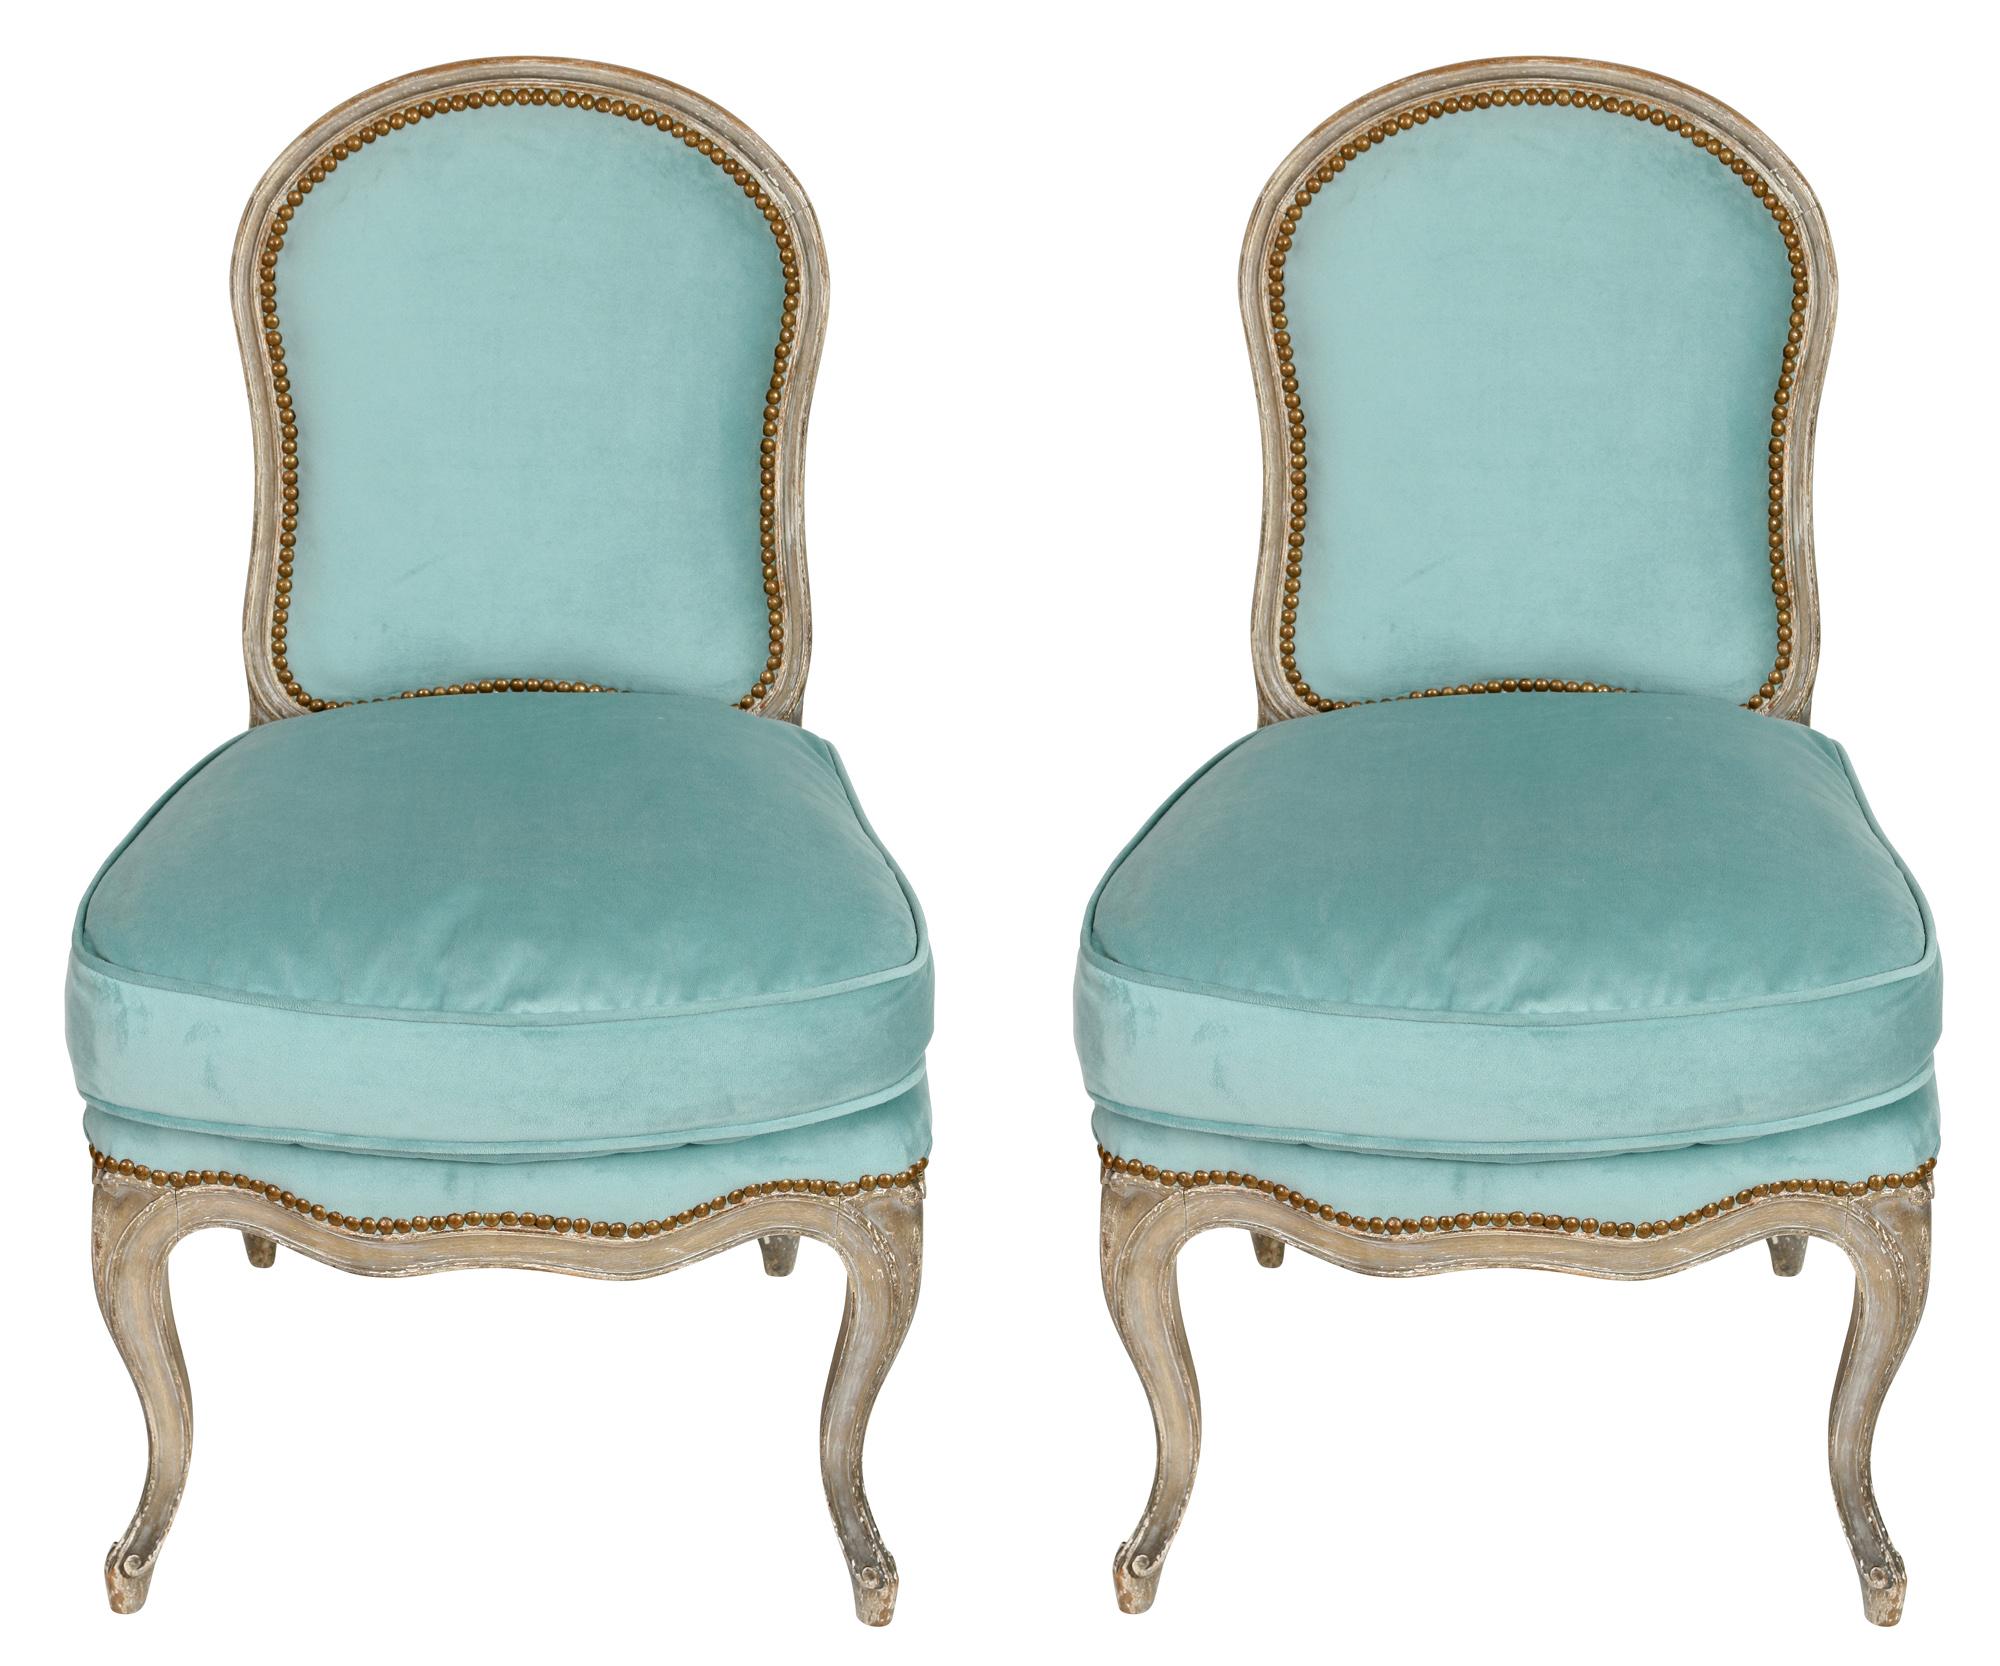 A charming pair of Louis XV style slipper chairs with a painted finish, a tight back and loose seat cushion, trimmed in nail heads. Upholstered in a lovely blue, this duo would be perfect as extra seating in living room or accent chairs in a bedroom